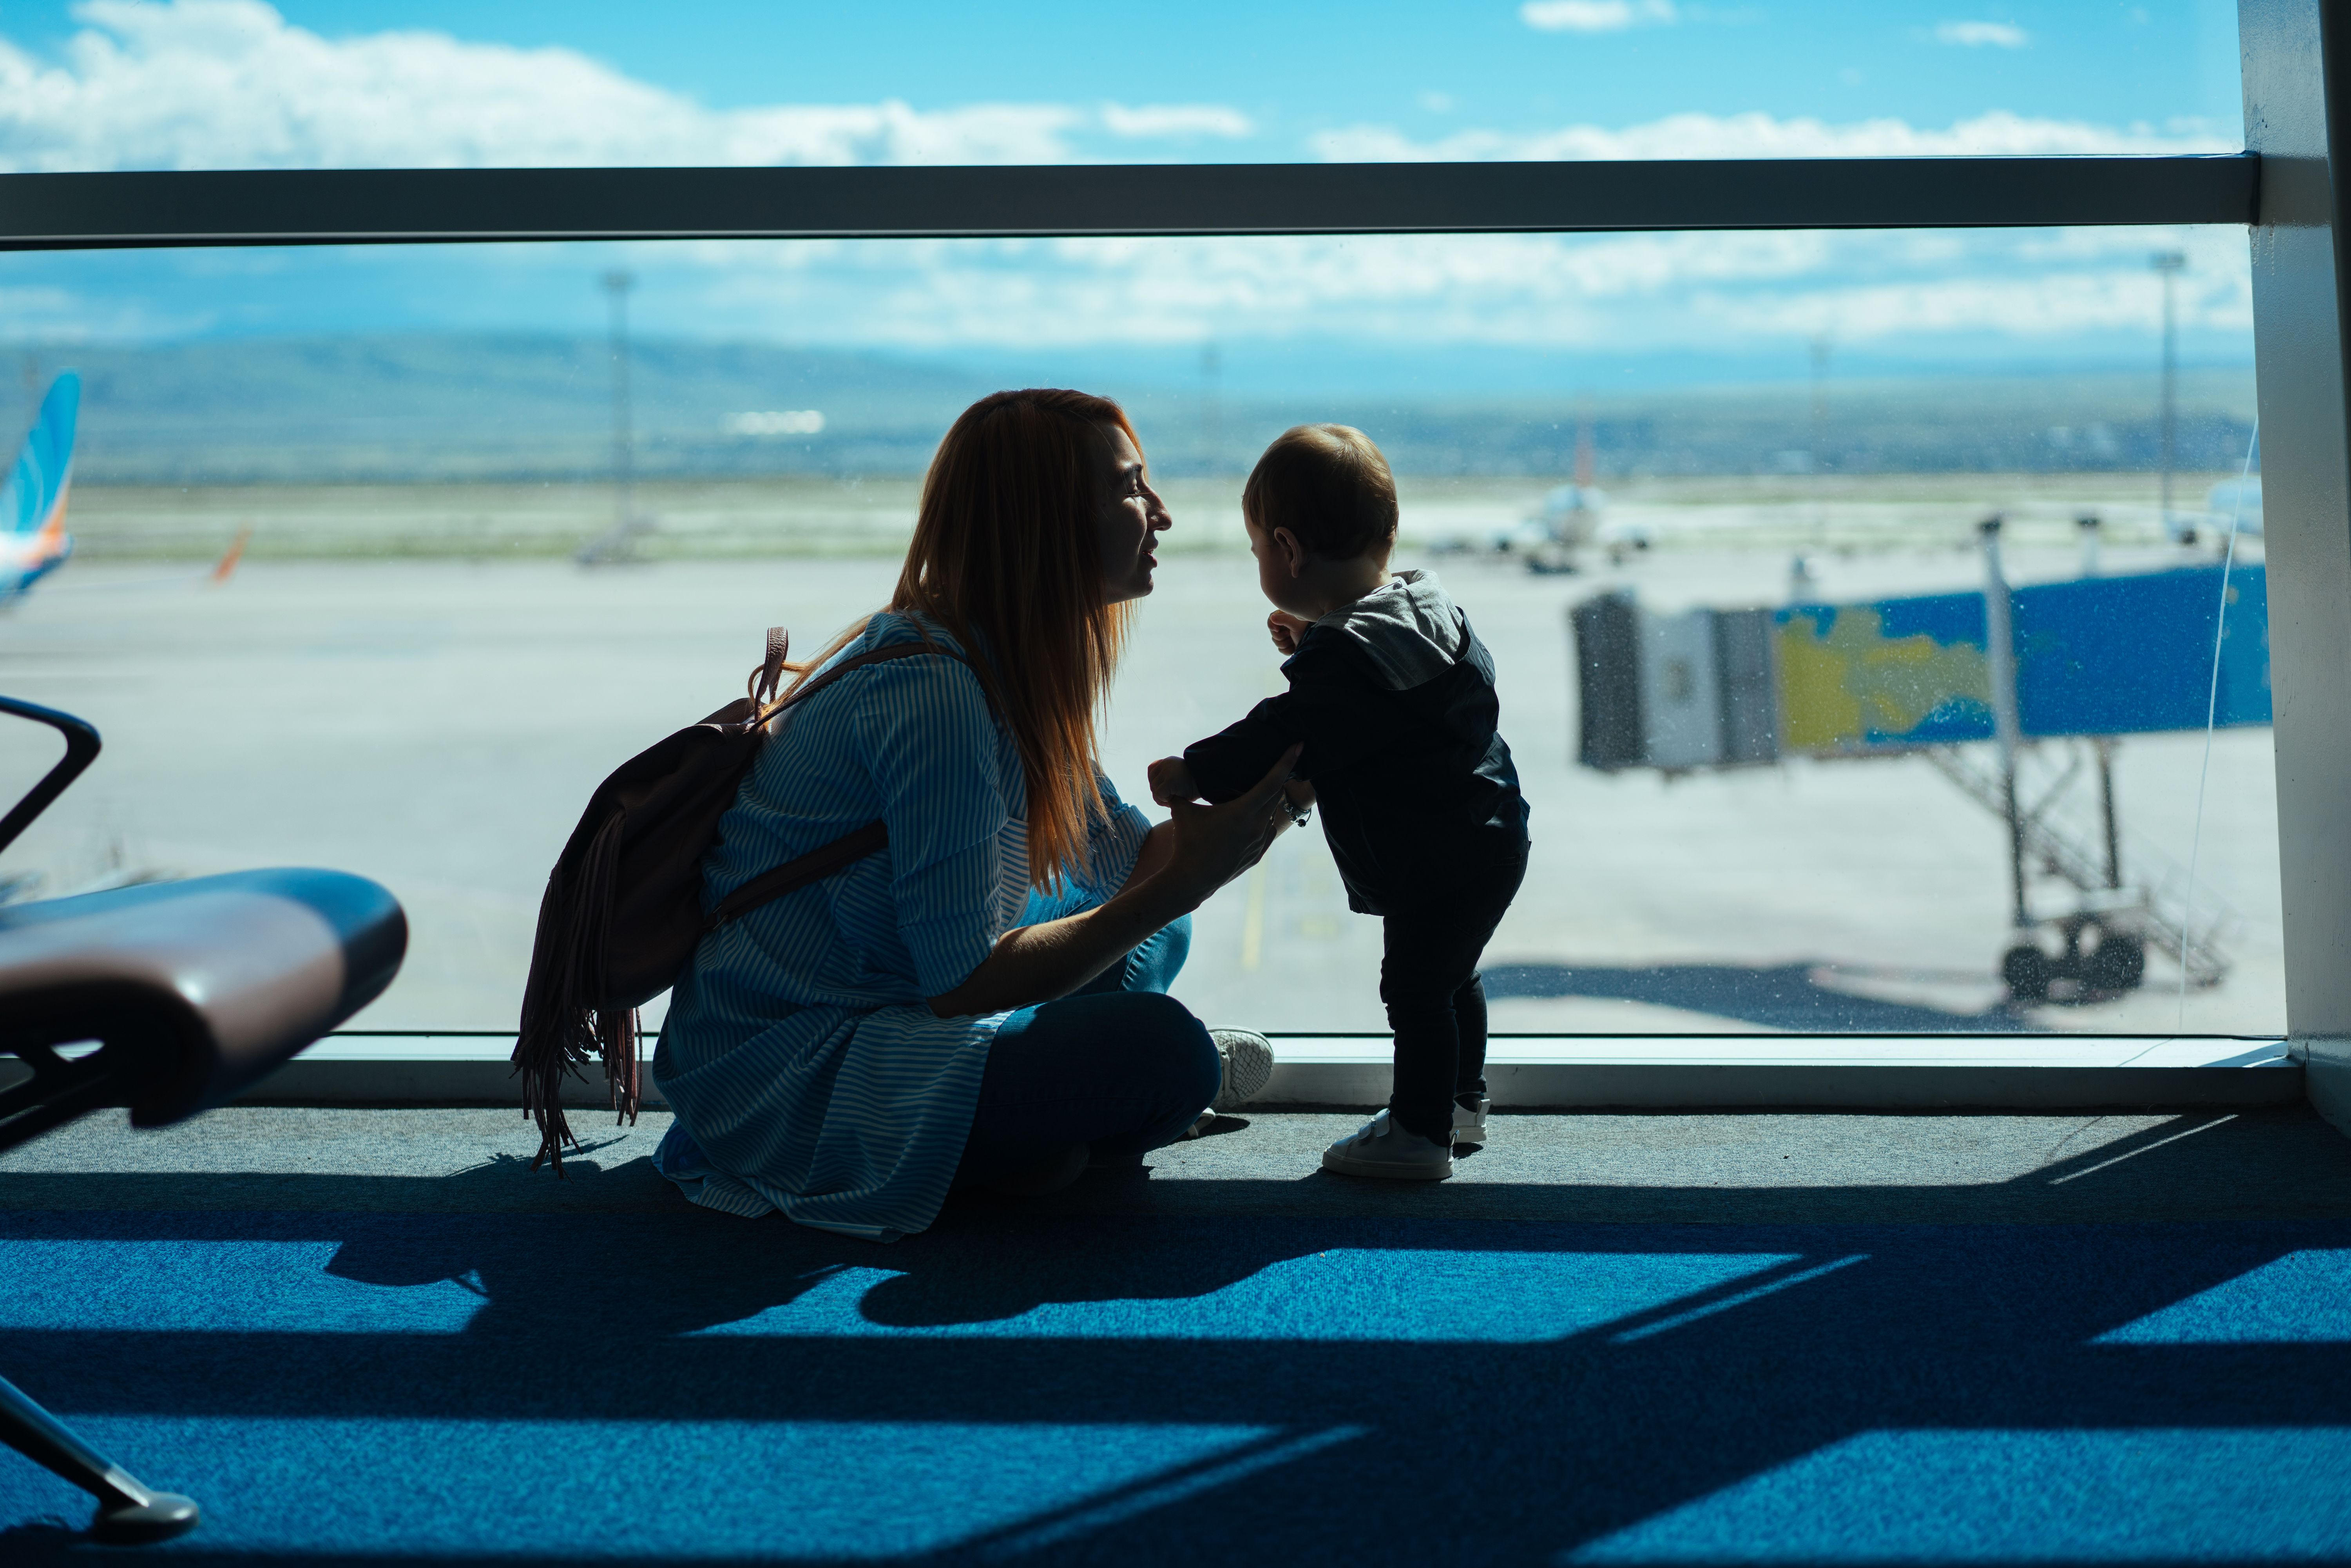 mom squatting down to toddler at airport